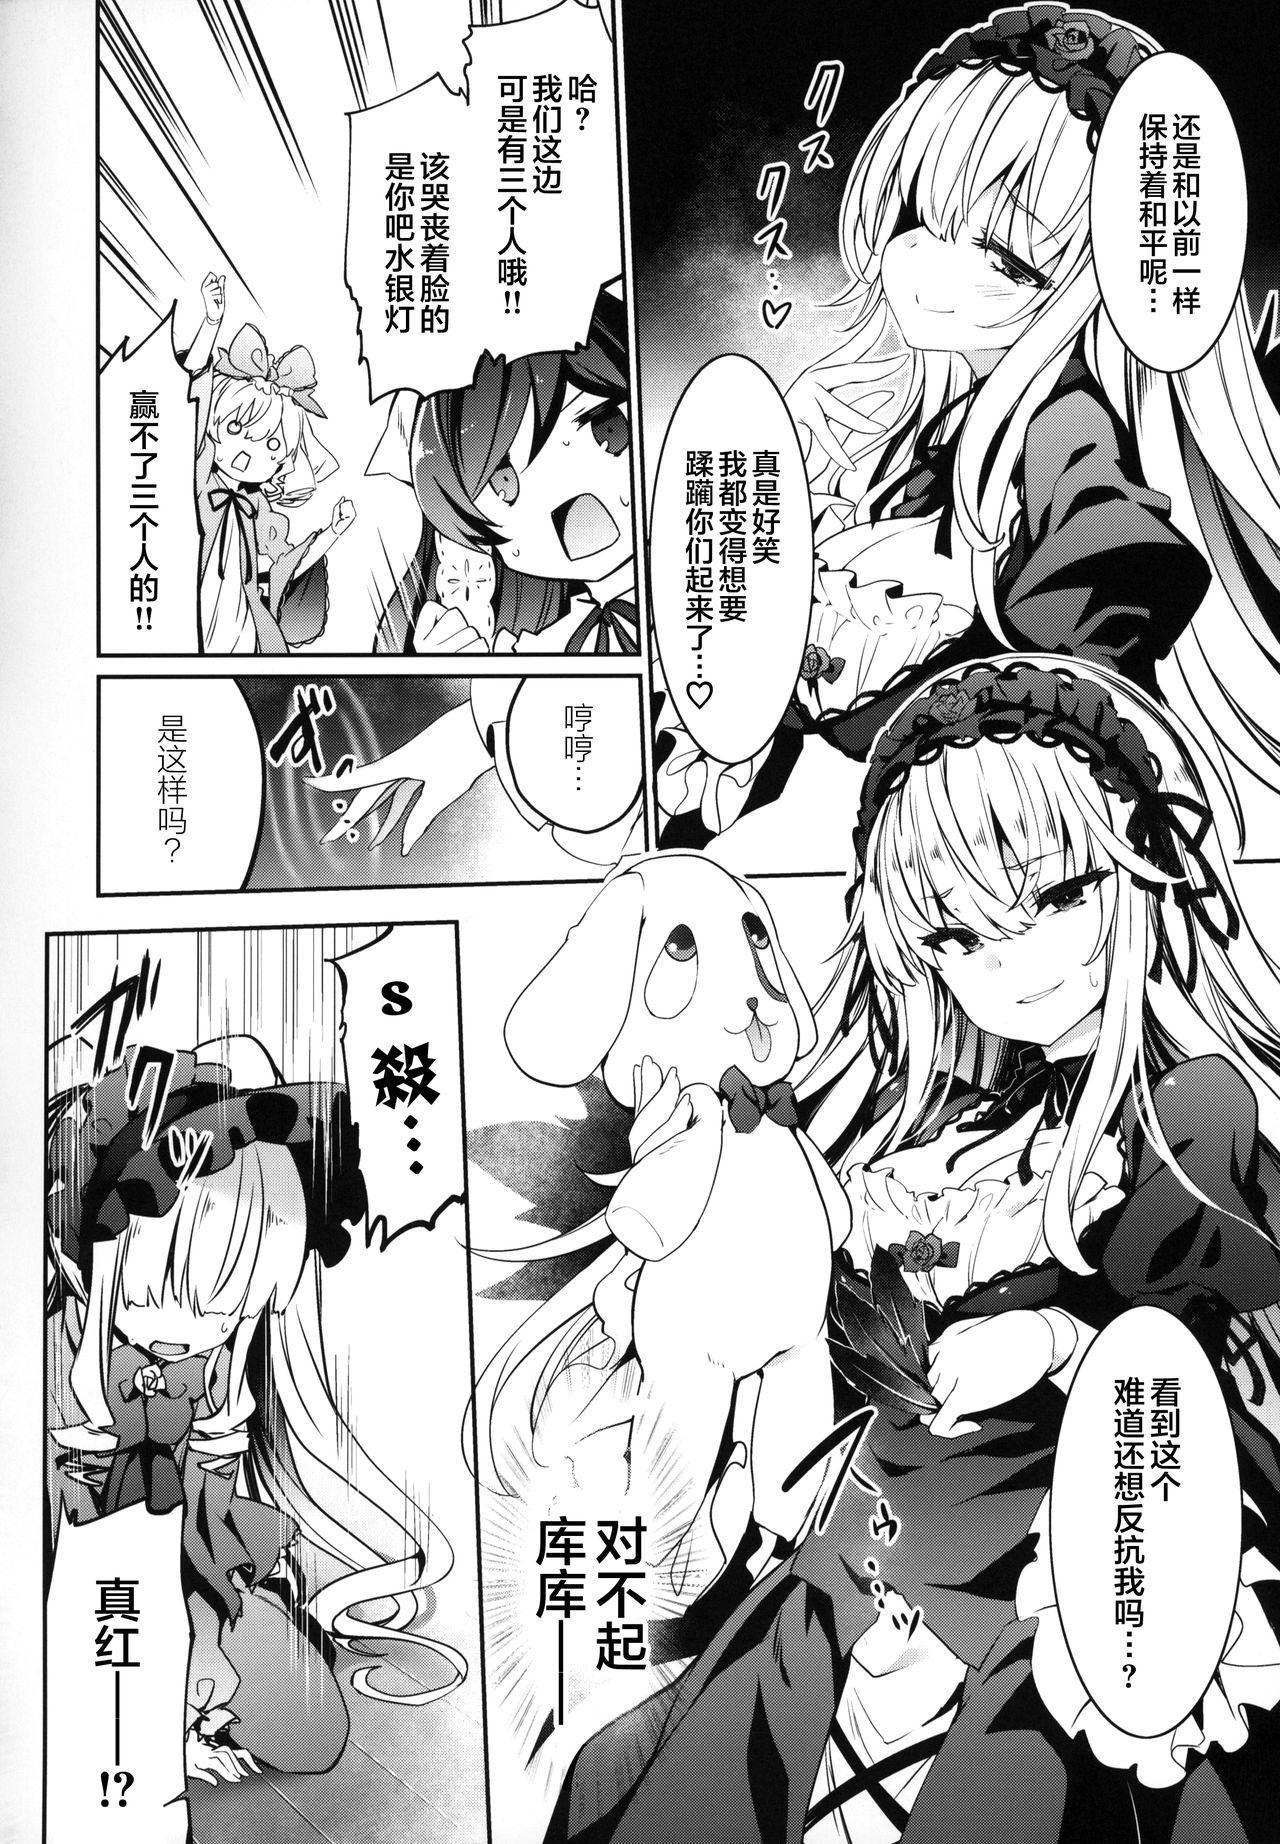 Whipping SUIGIN PRIDE - Rozen maiden Gay Kissing - Page 8